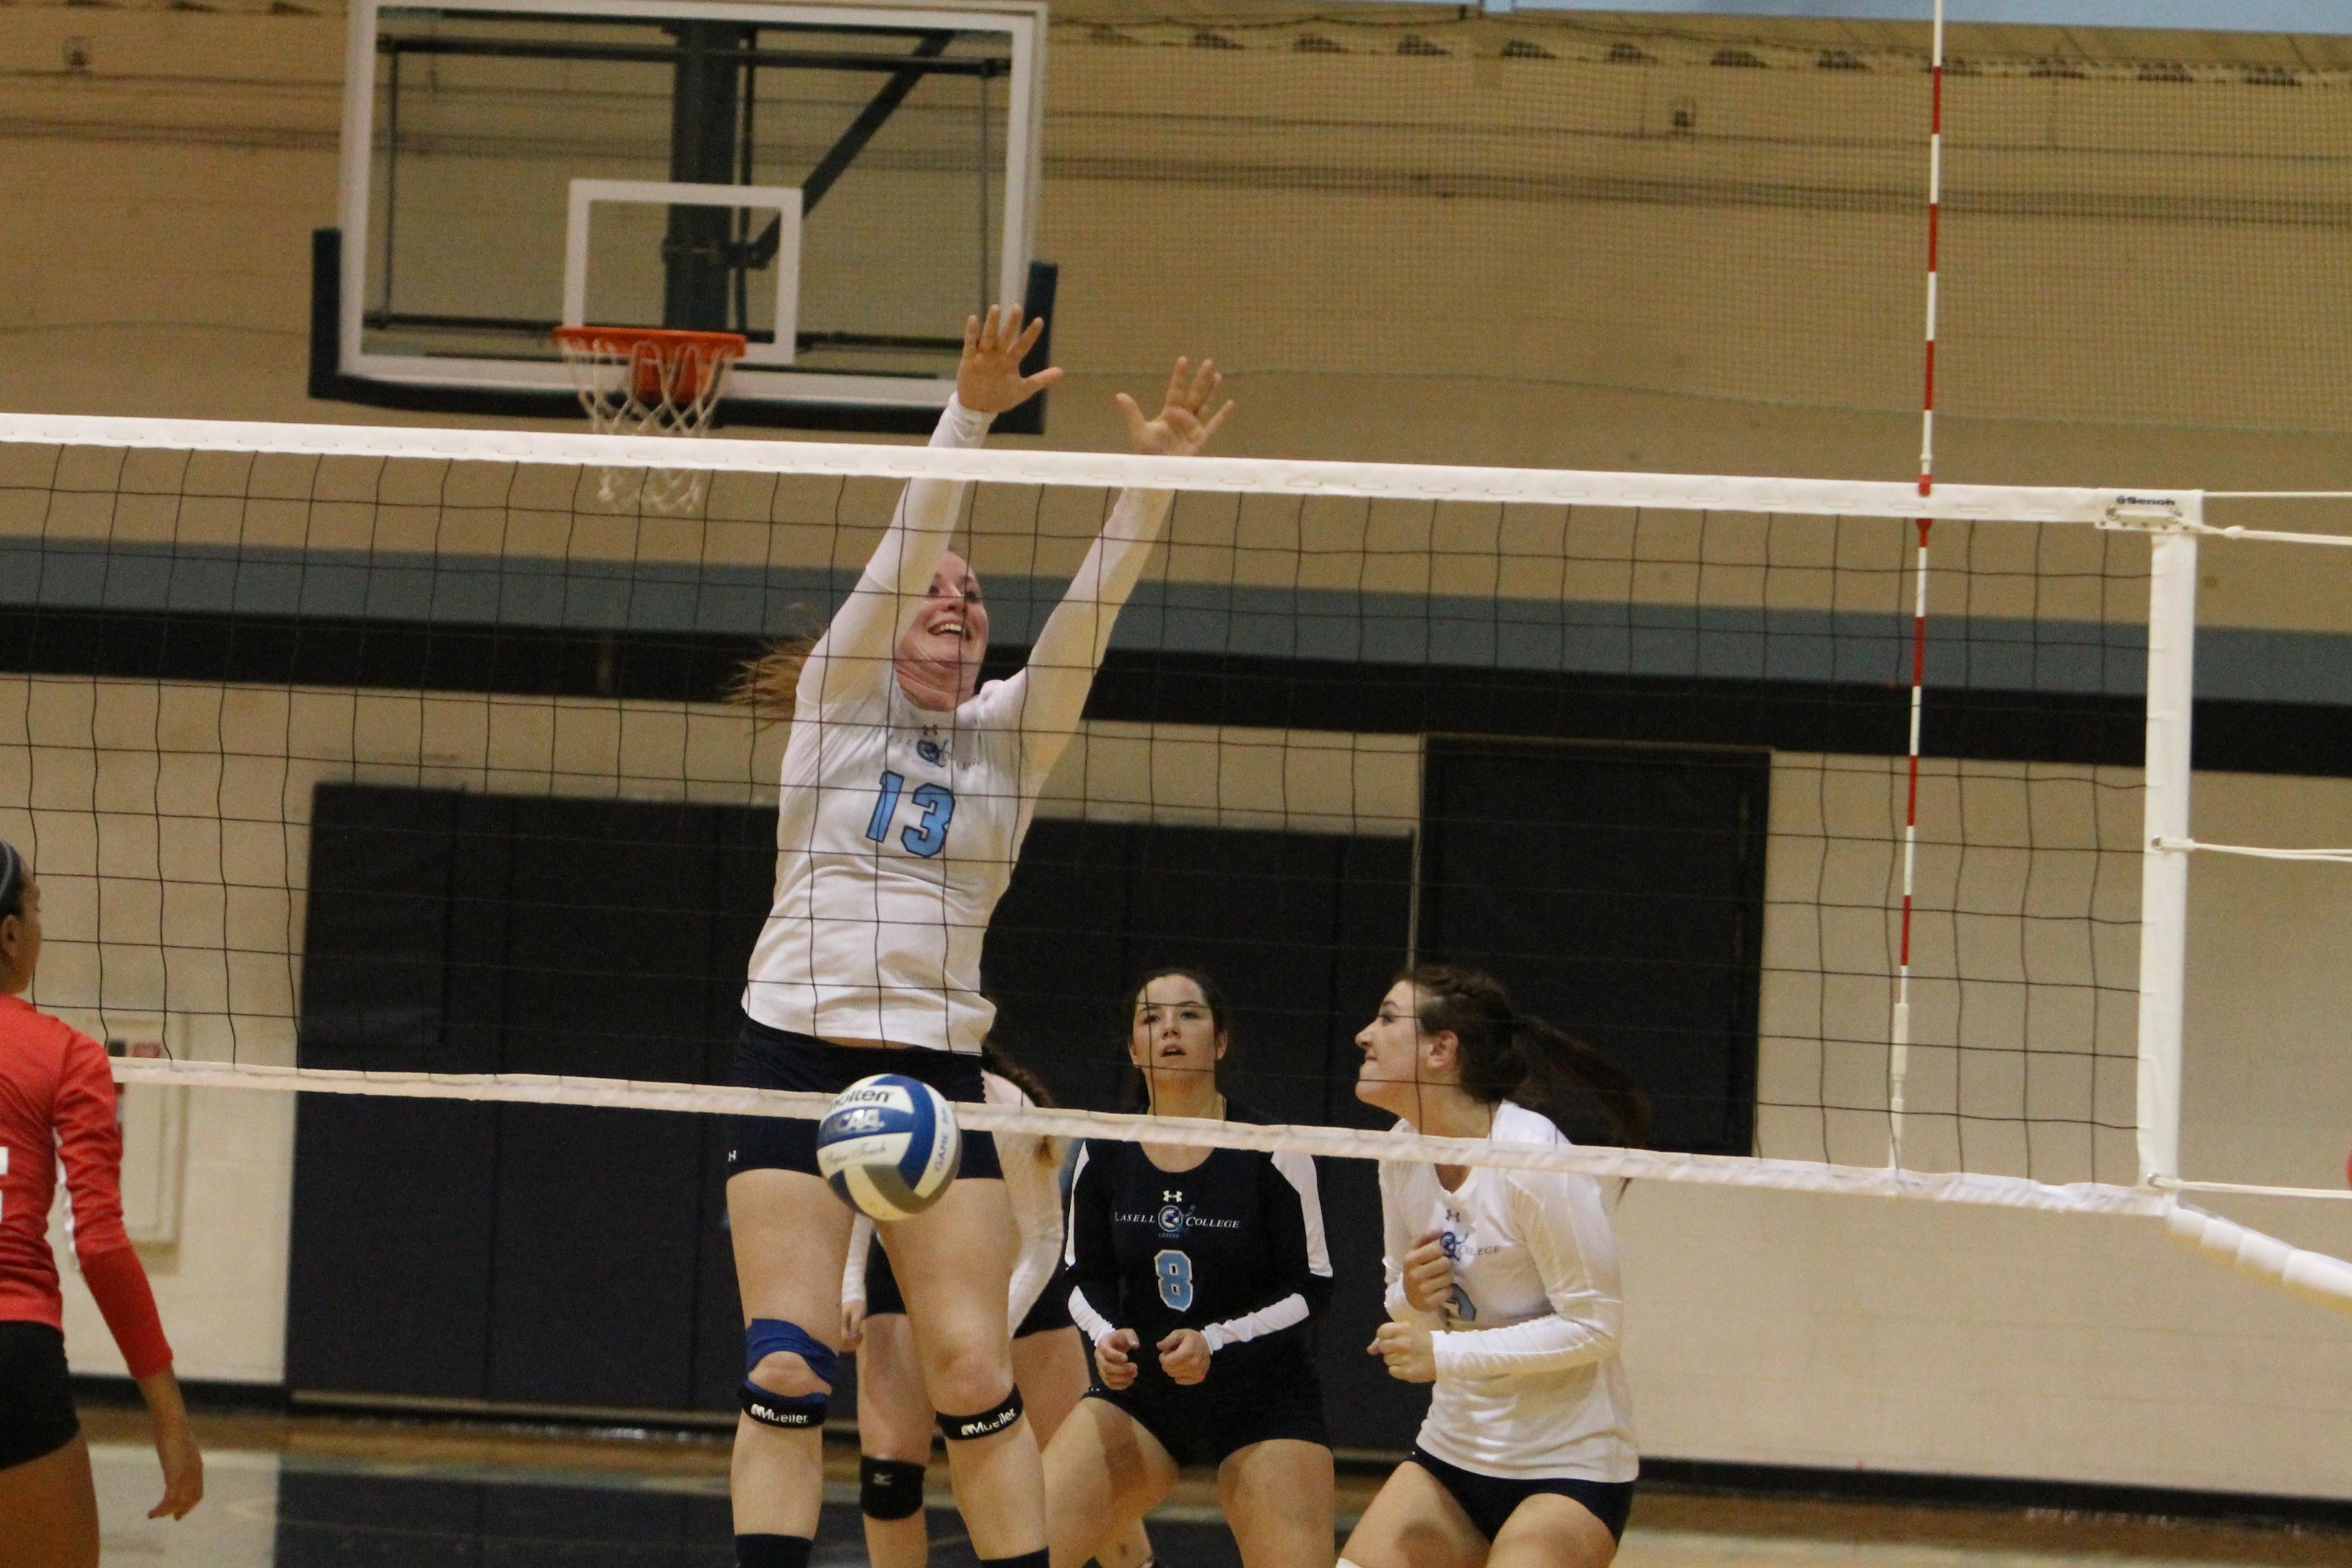 Longley Leads Women's Volleyball to 3-0 Sweep of Wentworth